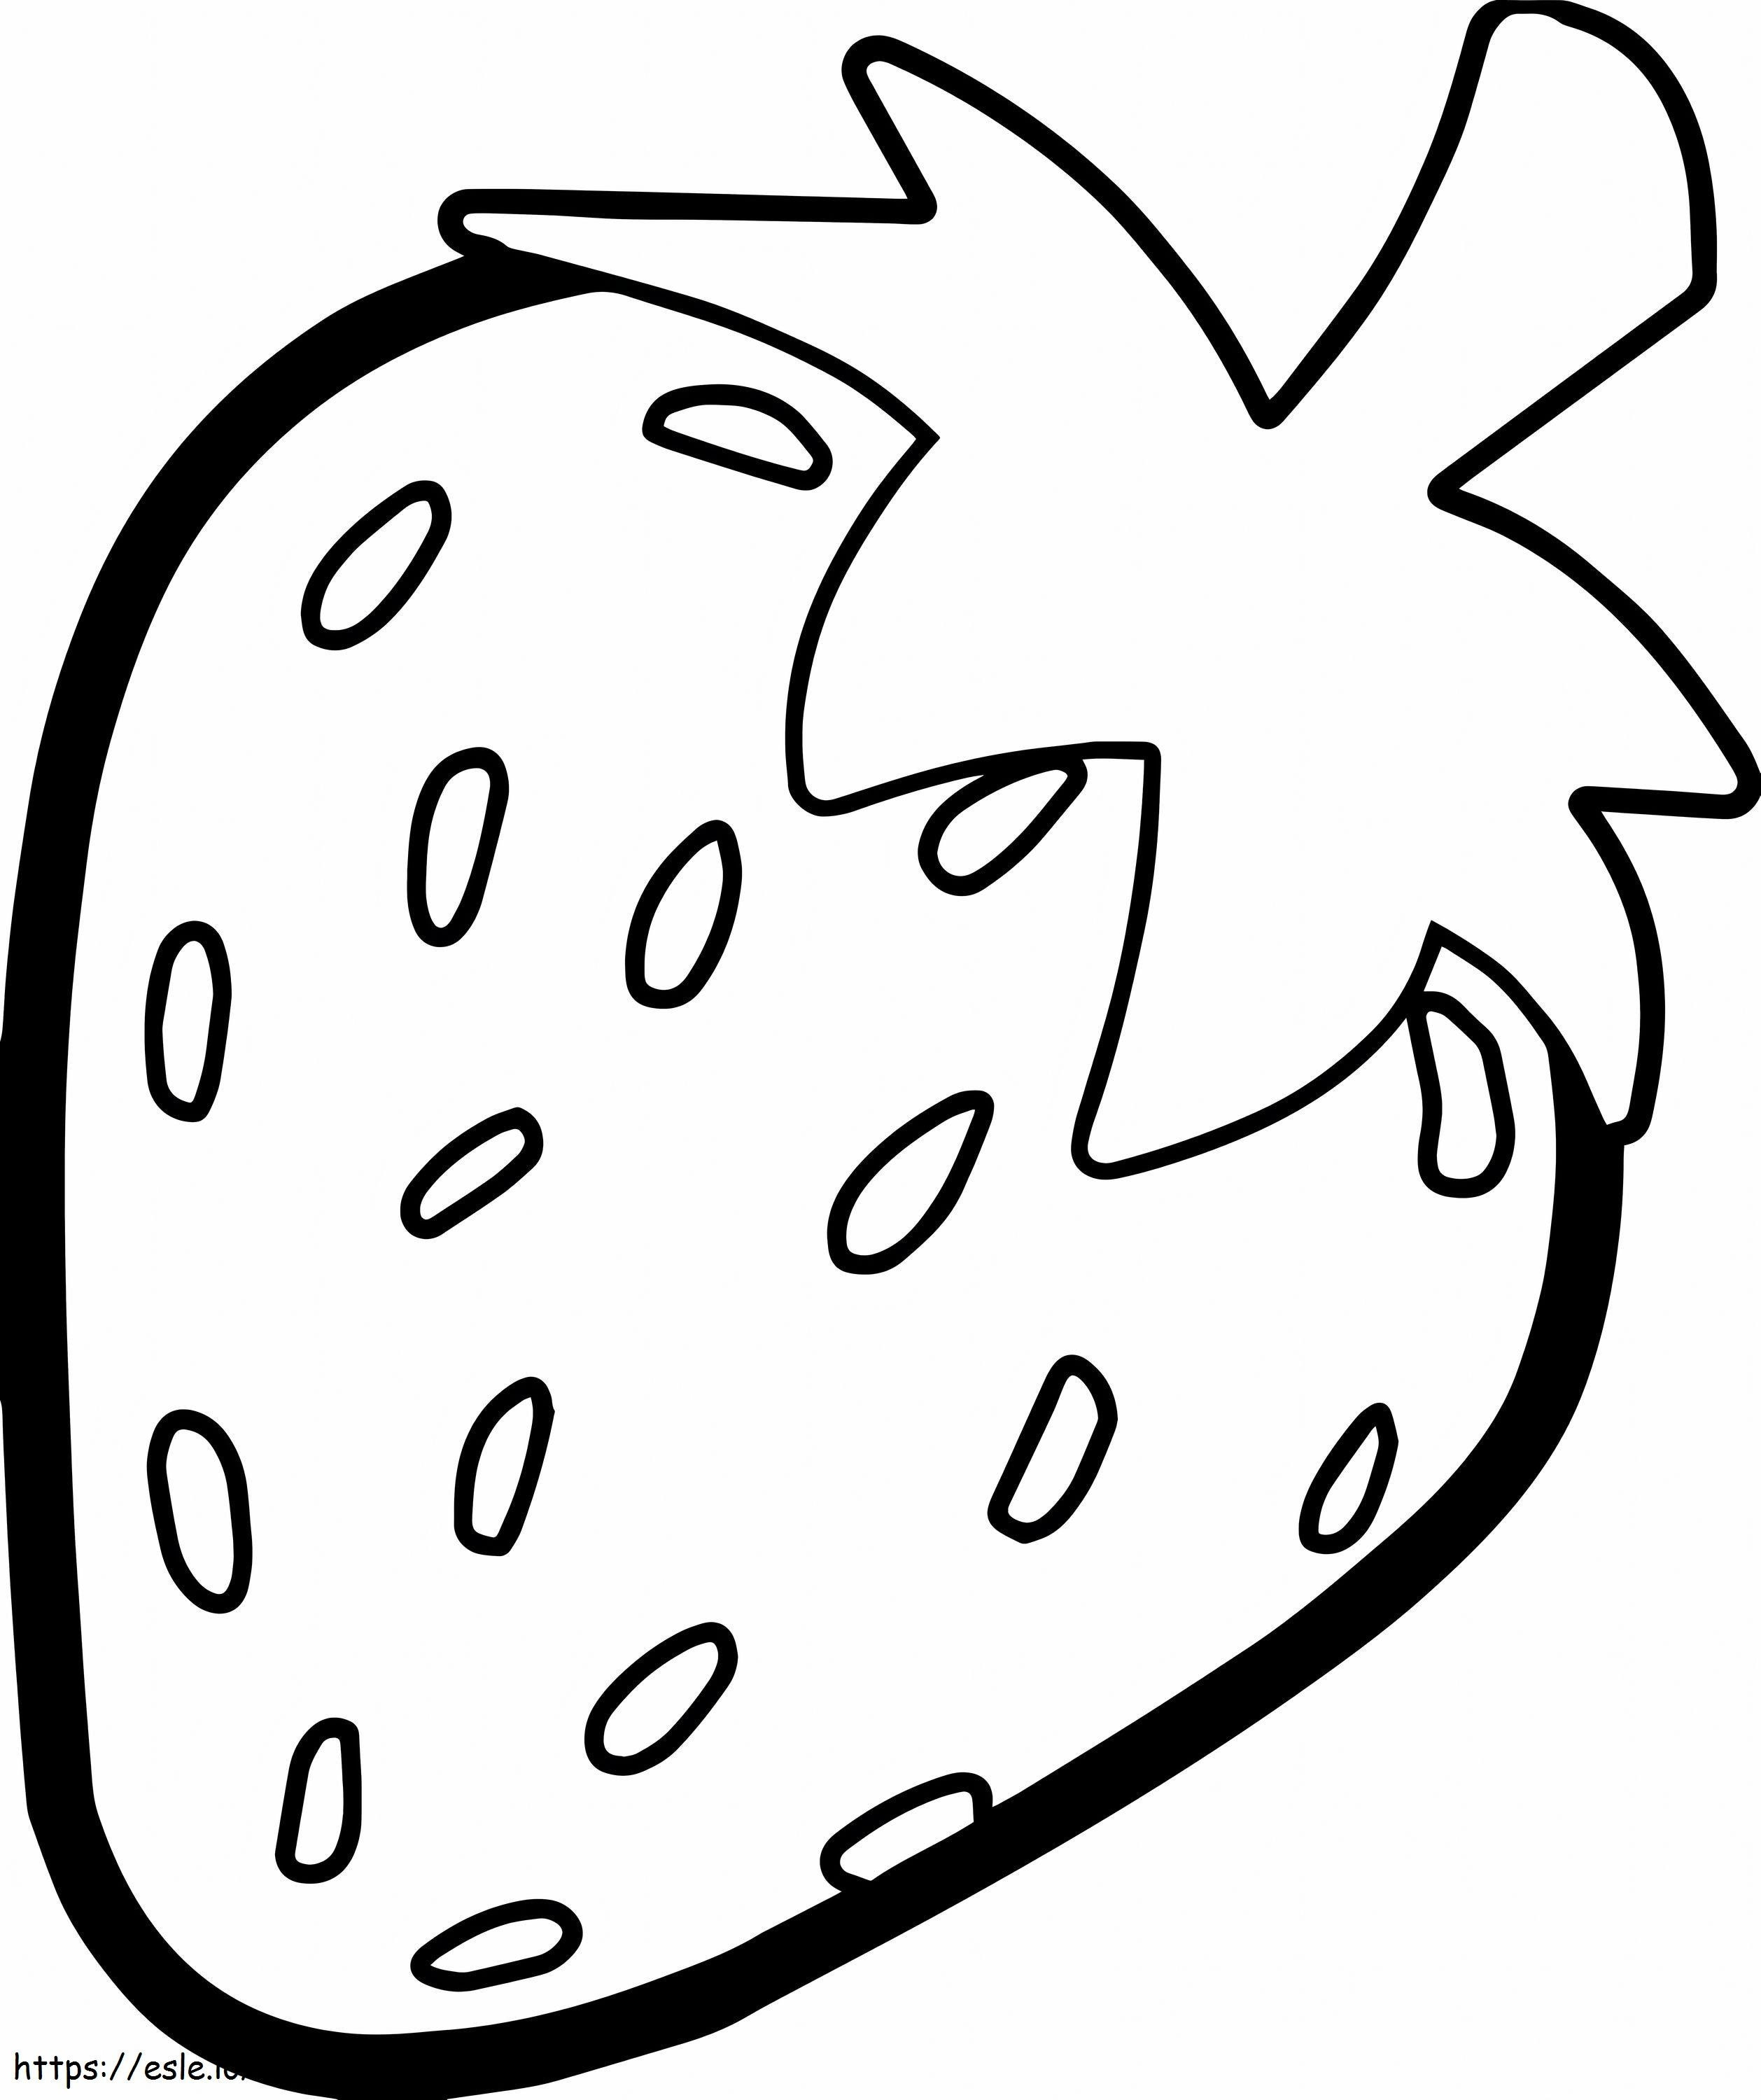 Scaled Single Strawberry coloring page